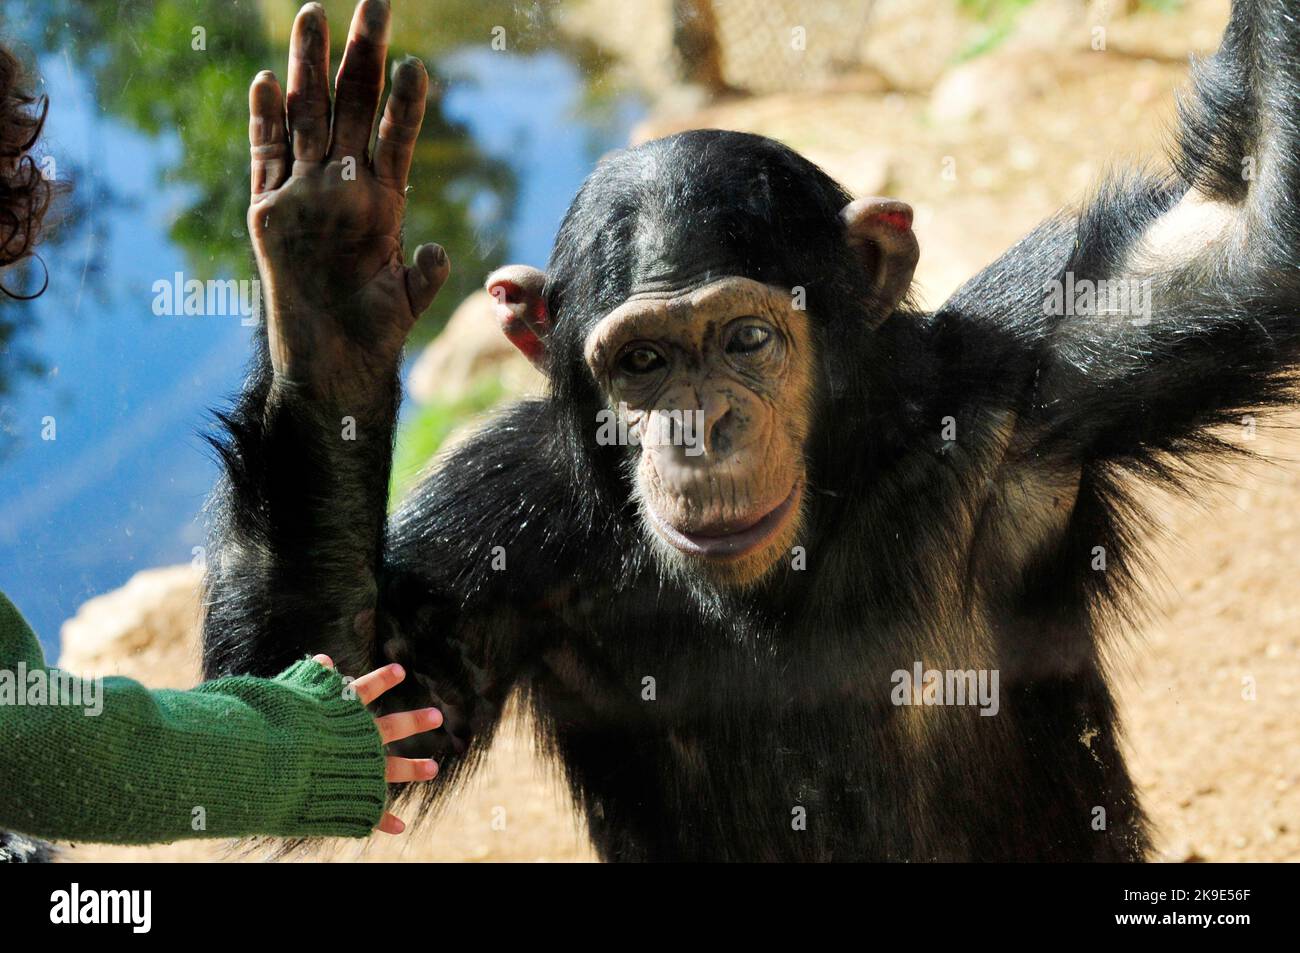 A toddler and a Chimpanzee gazing and interacting with each other. Stock Photo